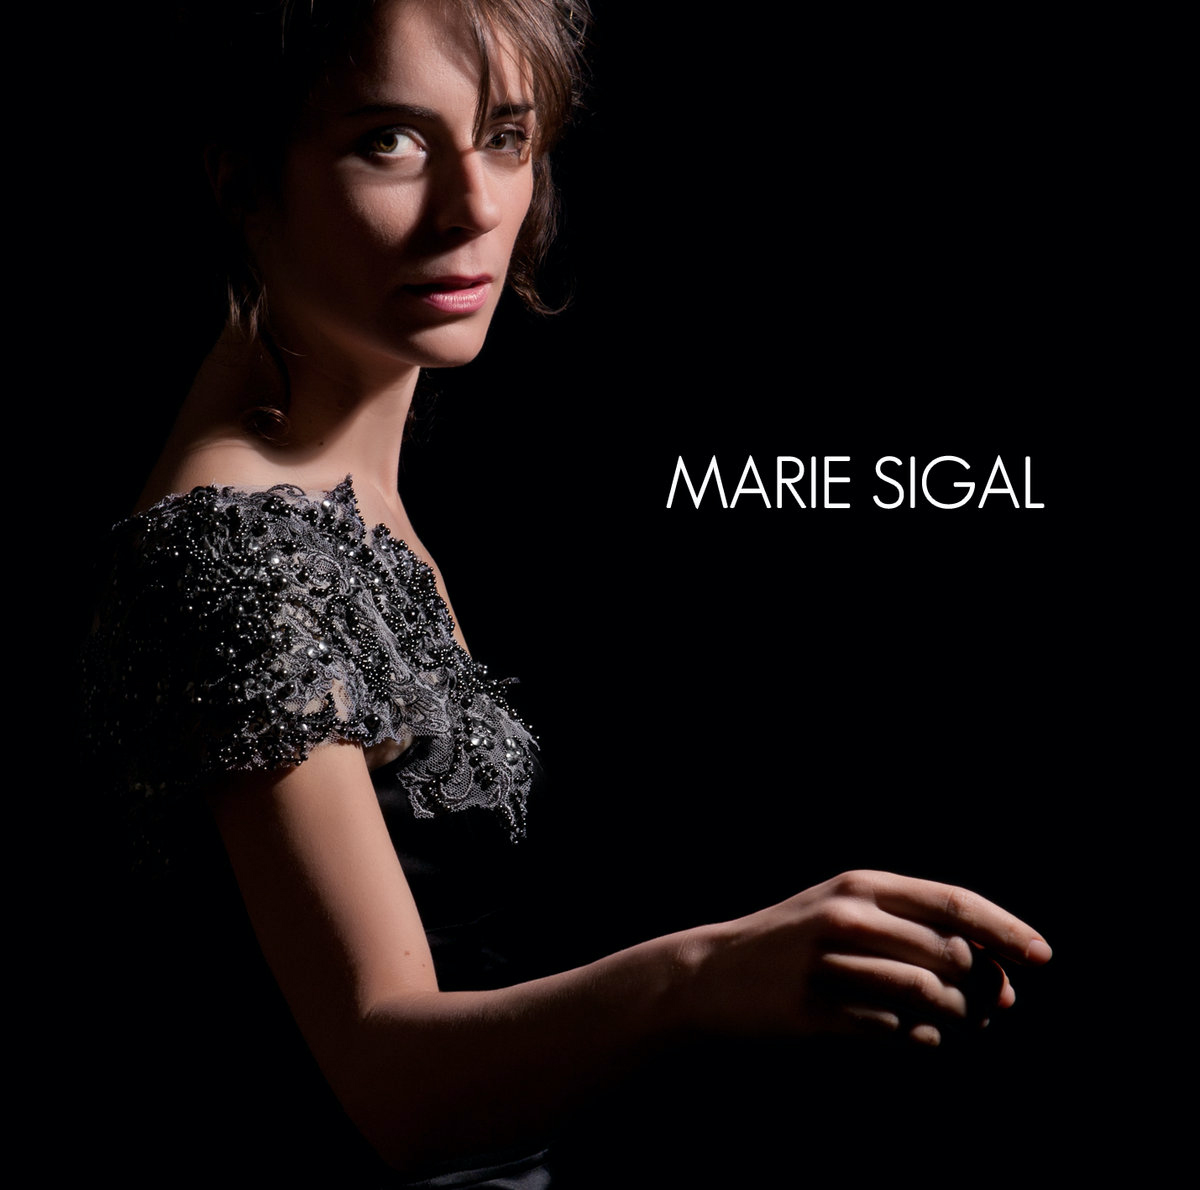 Marie Sigal